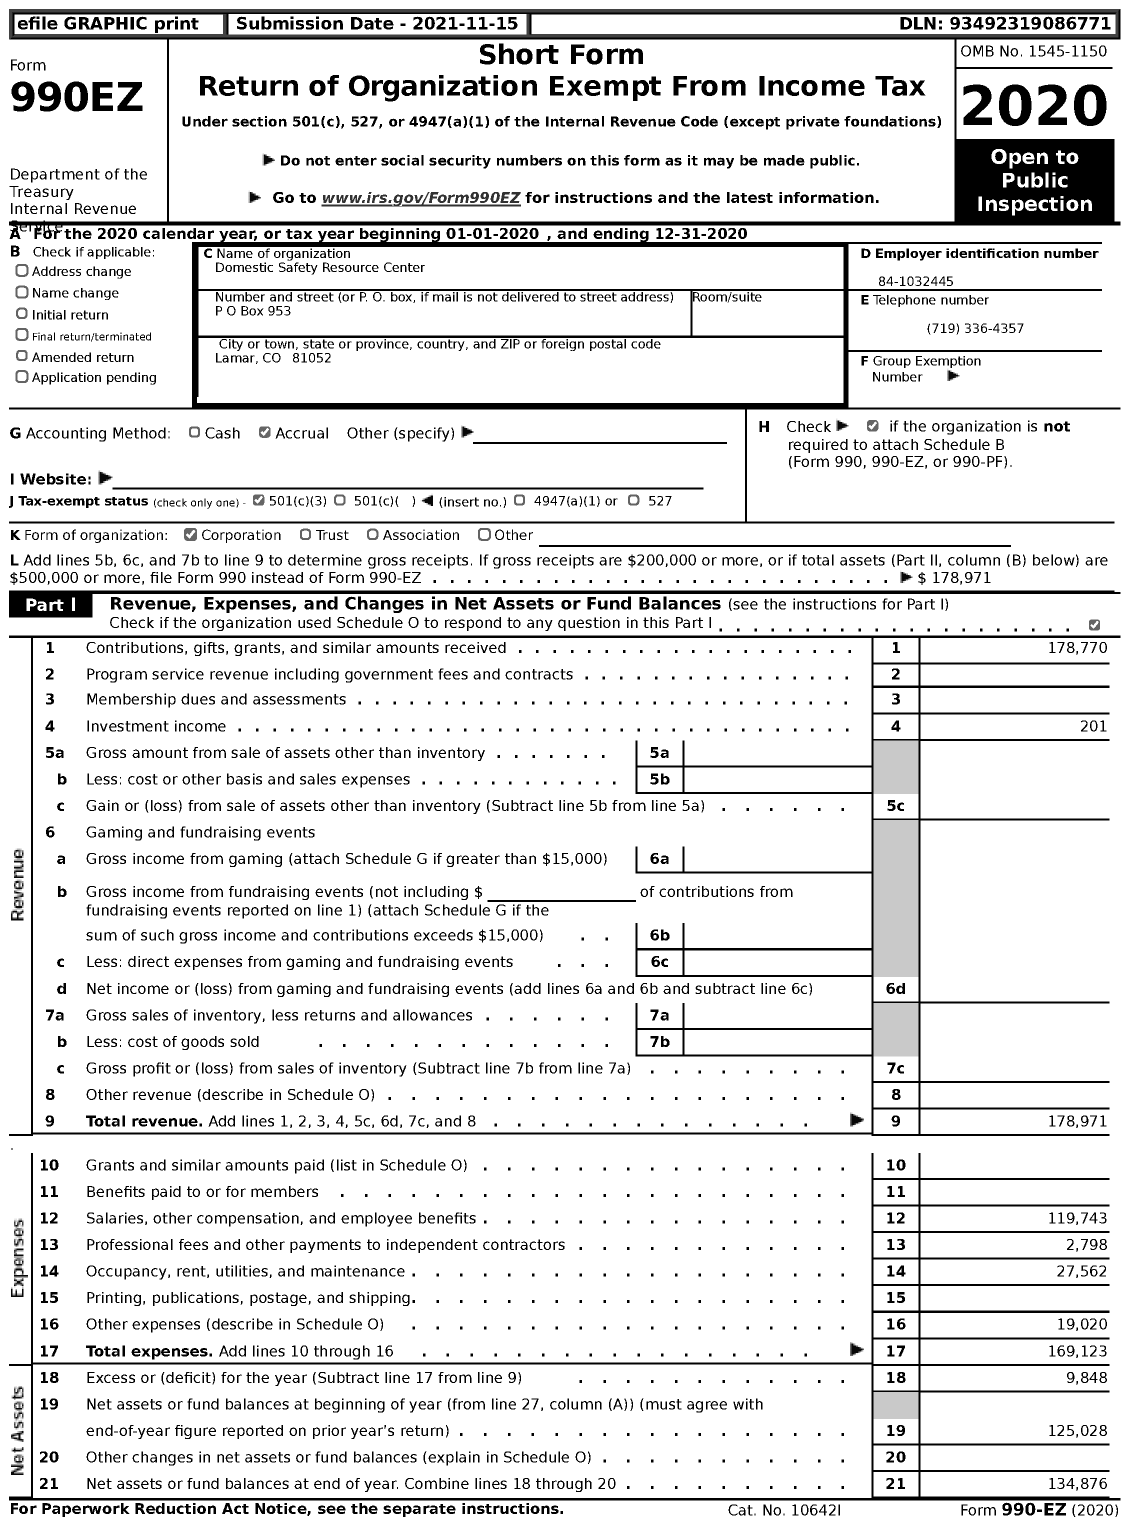 Image of first page of 2020 Form 990EZ for Domestic Safety Resource Center